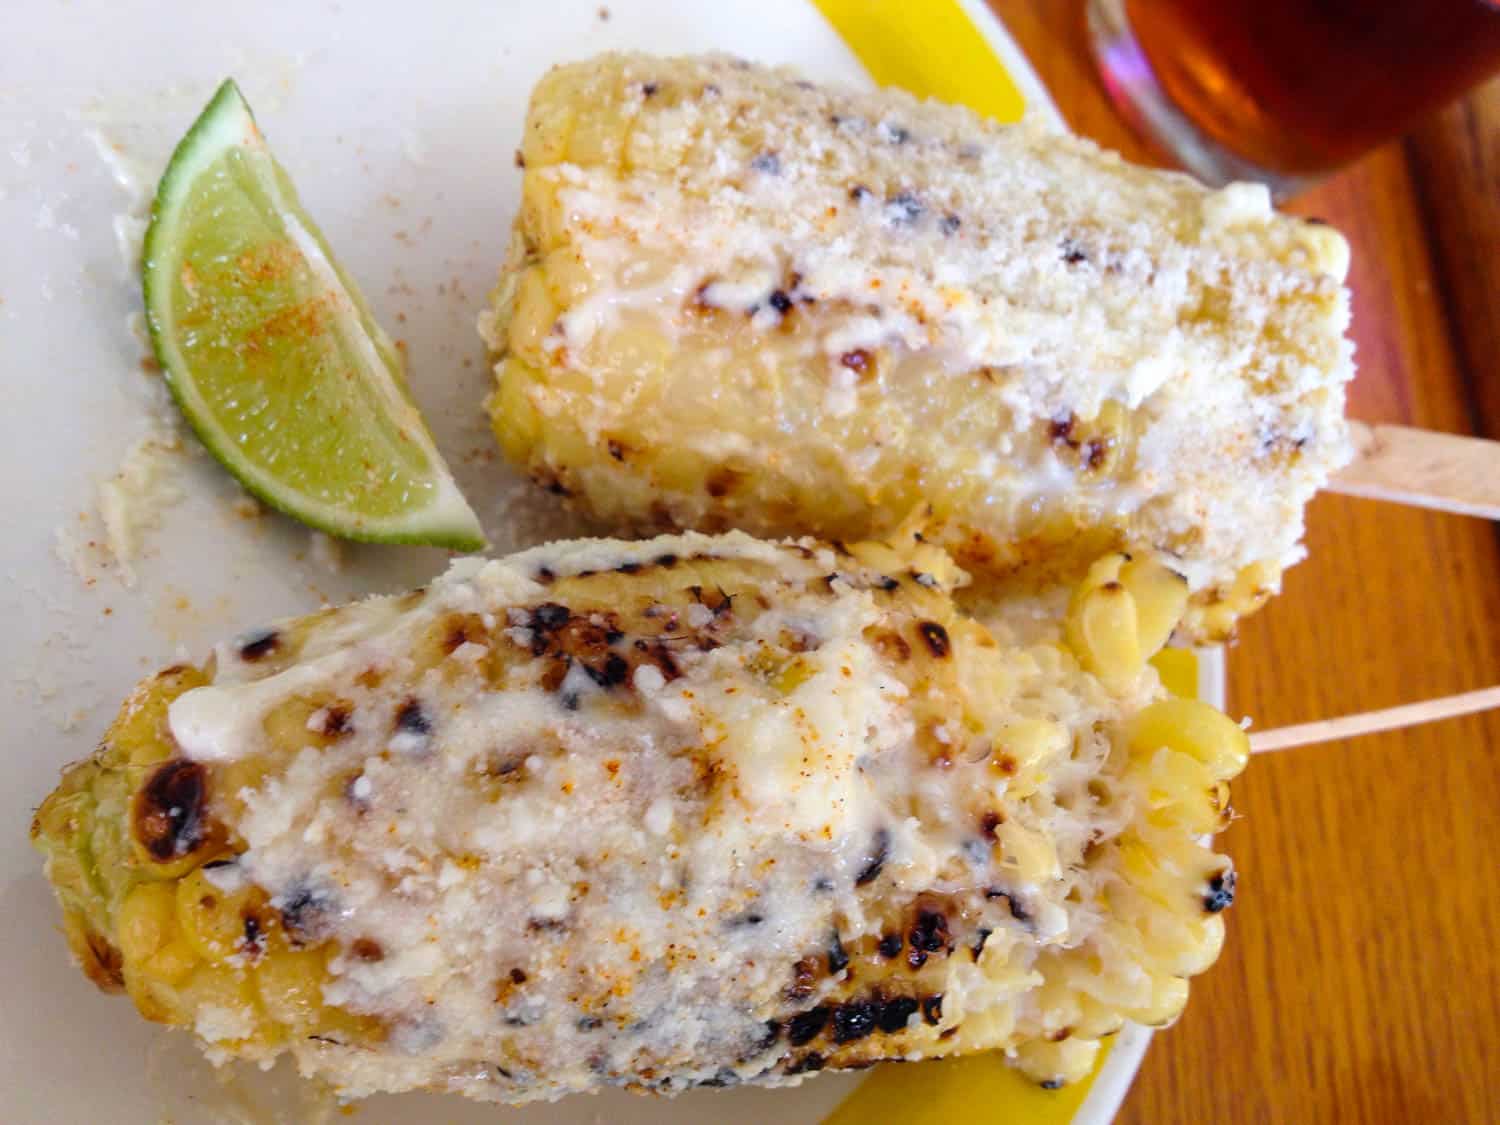 Elotes loco or grilled corn is a Guatemalan food you need to try. Discover 30 Guatemalan foods and travel to eat.